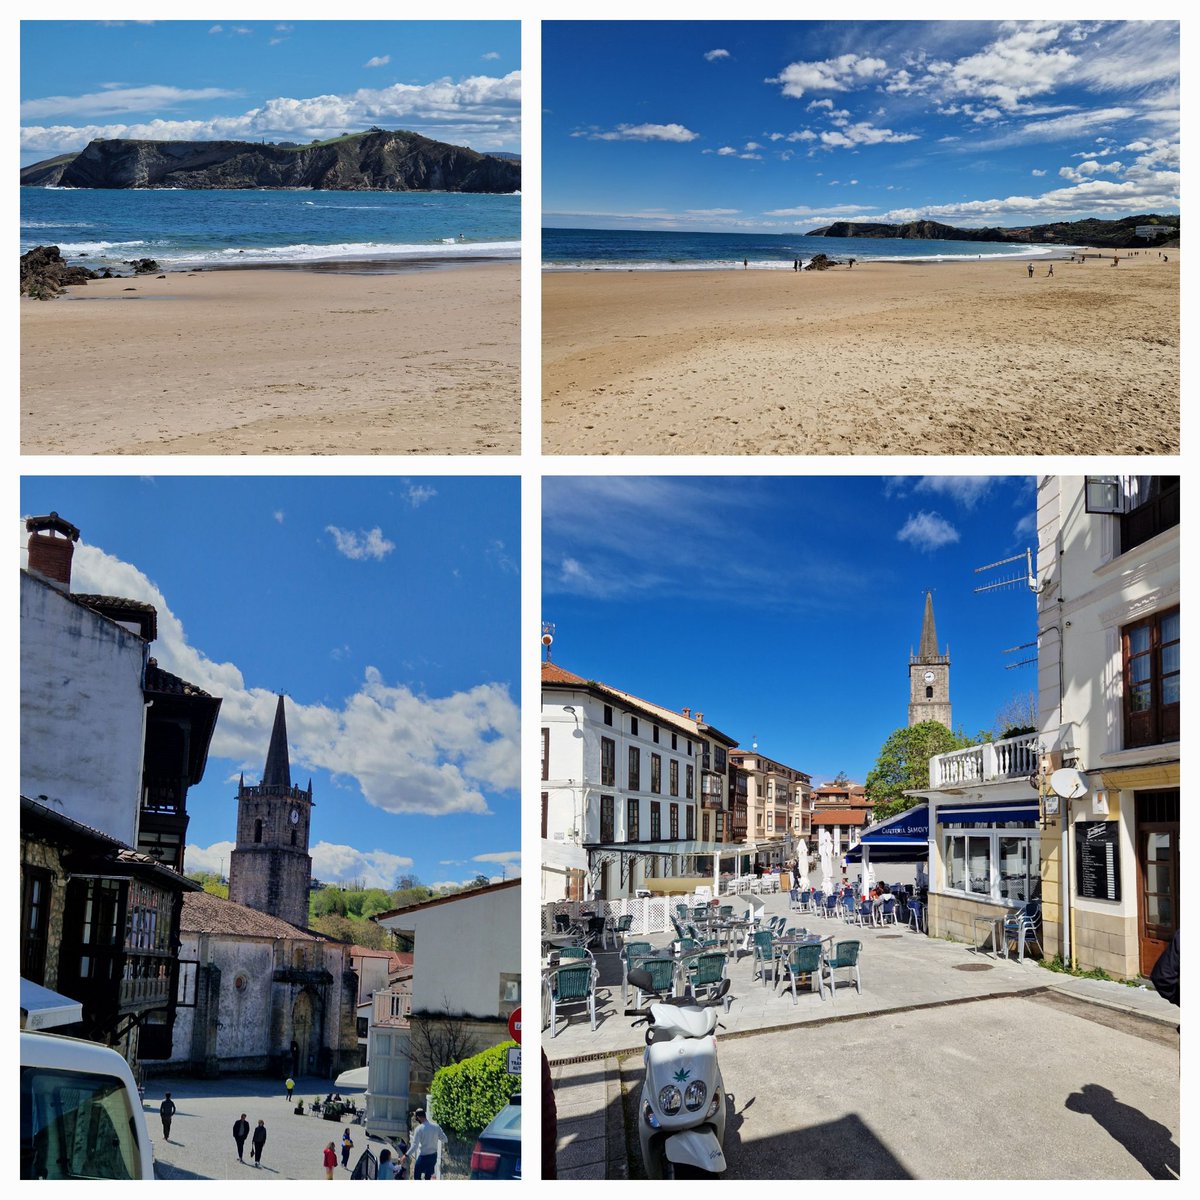 No better location to spend Easter Monday than in Comillas, a beautiful town in Cantabria, northern Spain, and one of our very favourite places. @ComillasTurismo @TurismoComillas